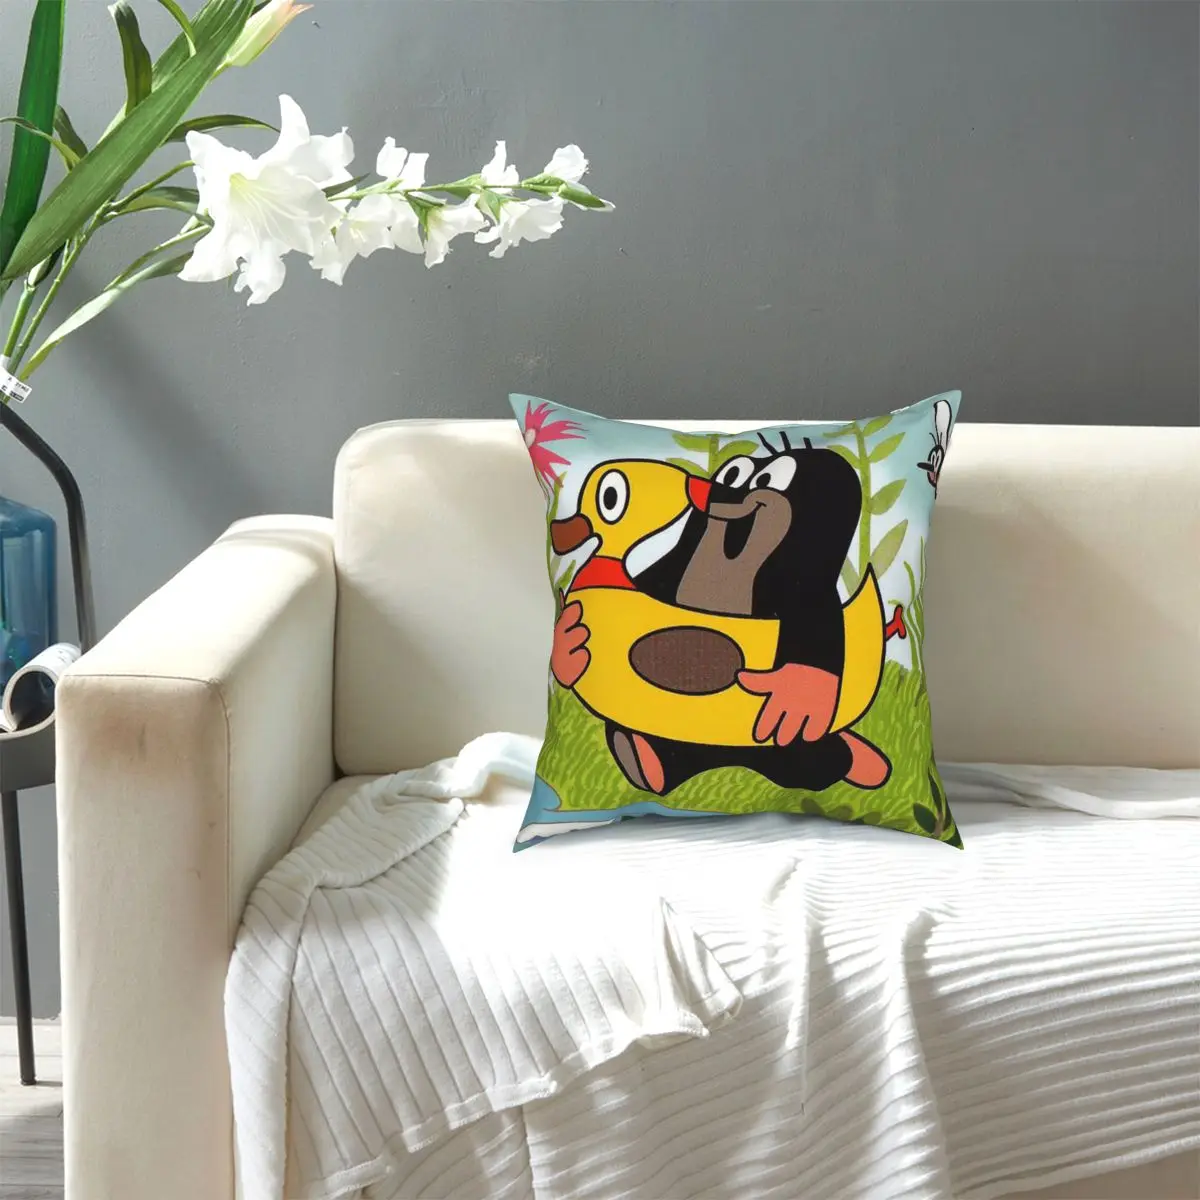 Mole Krtek Little Maulwurf Pillowcase Soft Fabric Cushion Cover Decoration Throw Pillow Case Cover Home Dropshipping 45*45cm images - 6